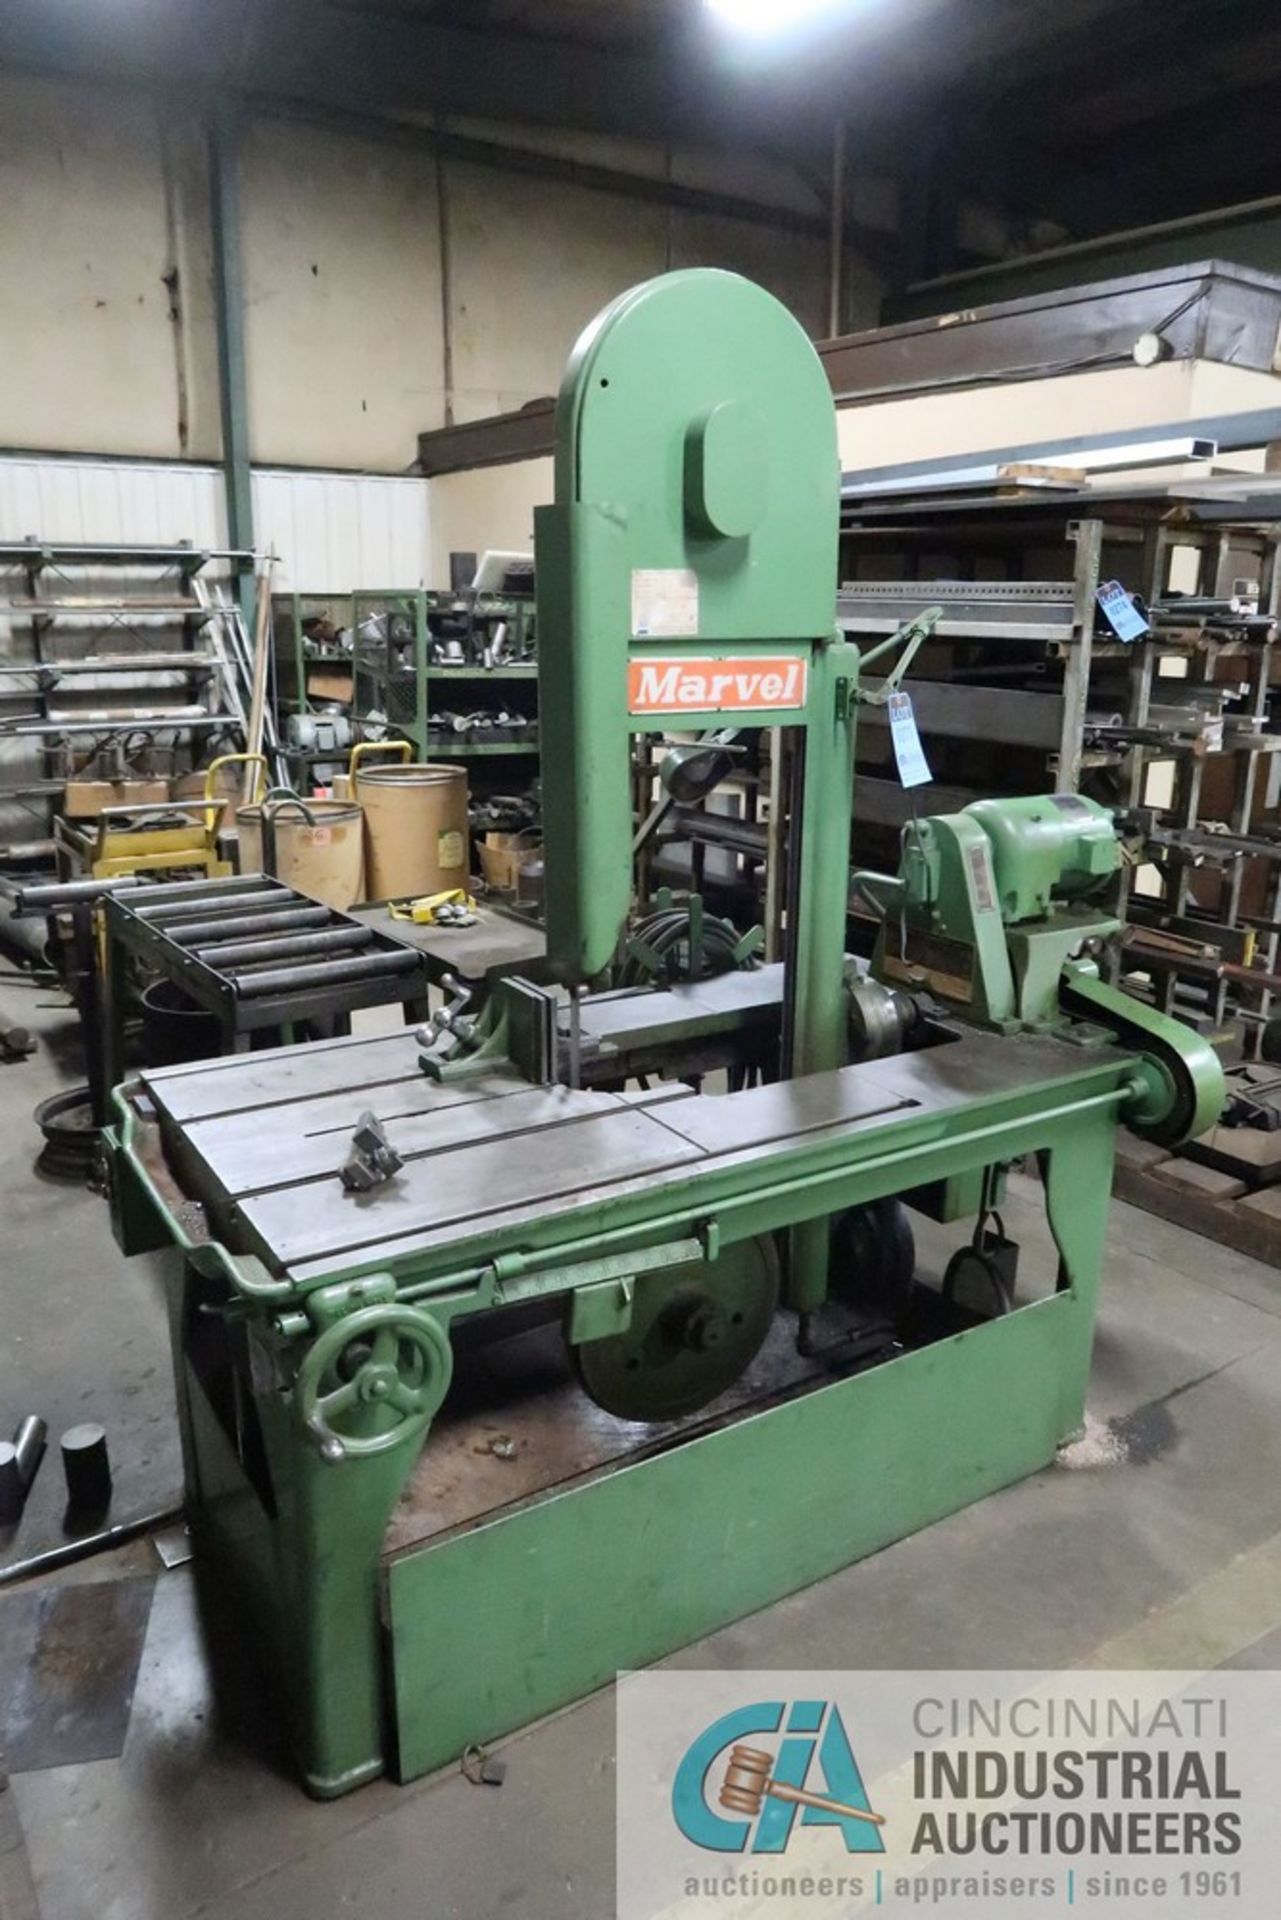 18" MARVEL NO. 8/M8 BELT DRIVE VERTICAL BAND SAW; S/N 88307, 42" X 33" TABLE, 1.33 HP - Image 2 of 11